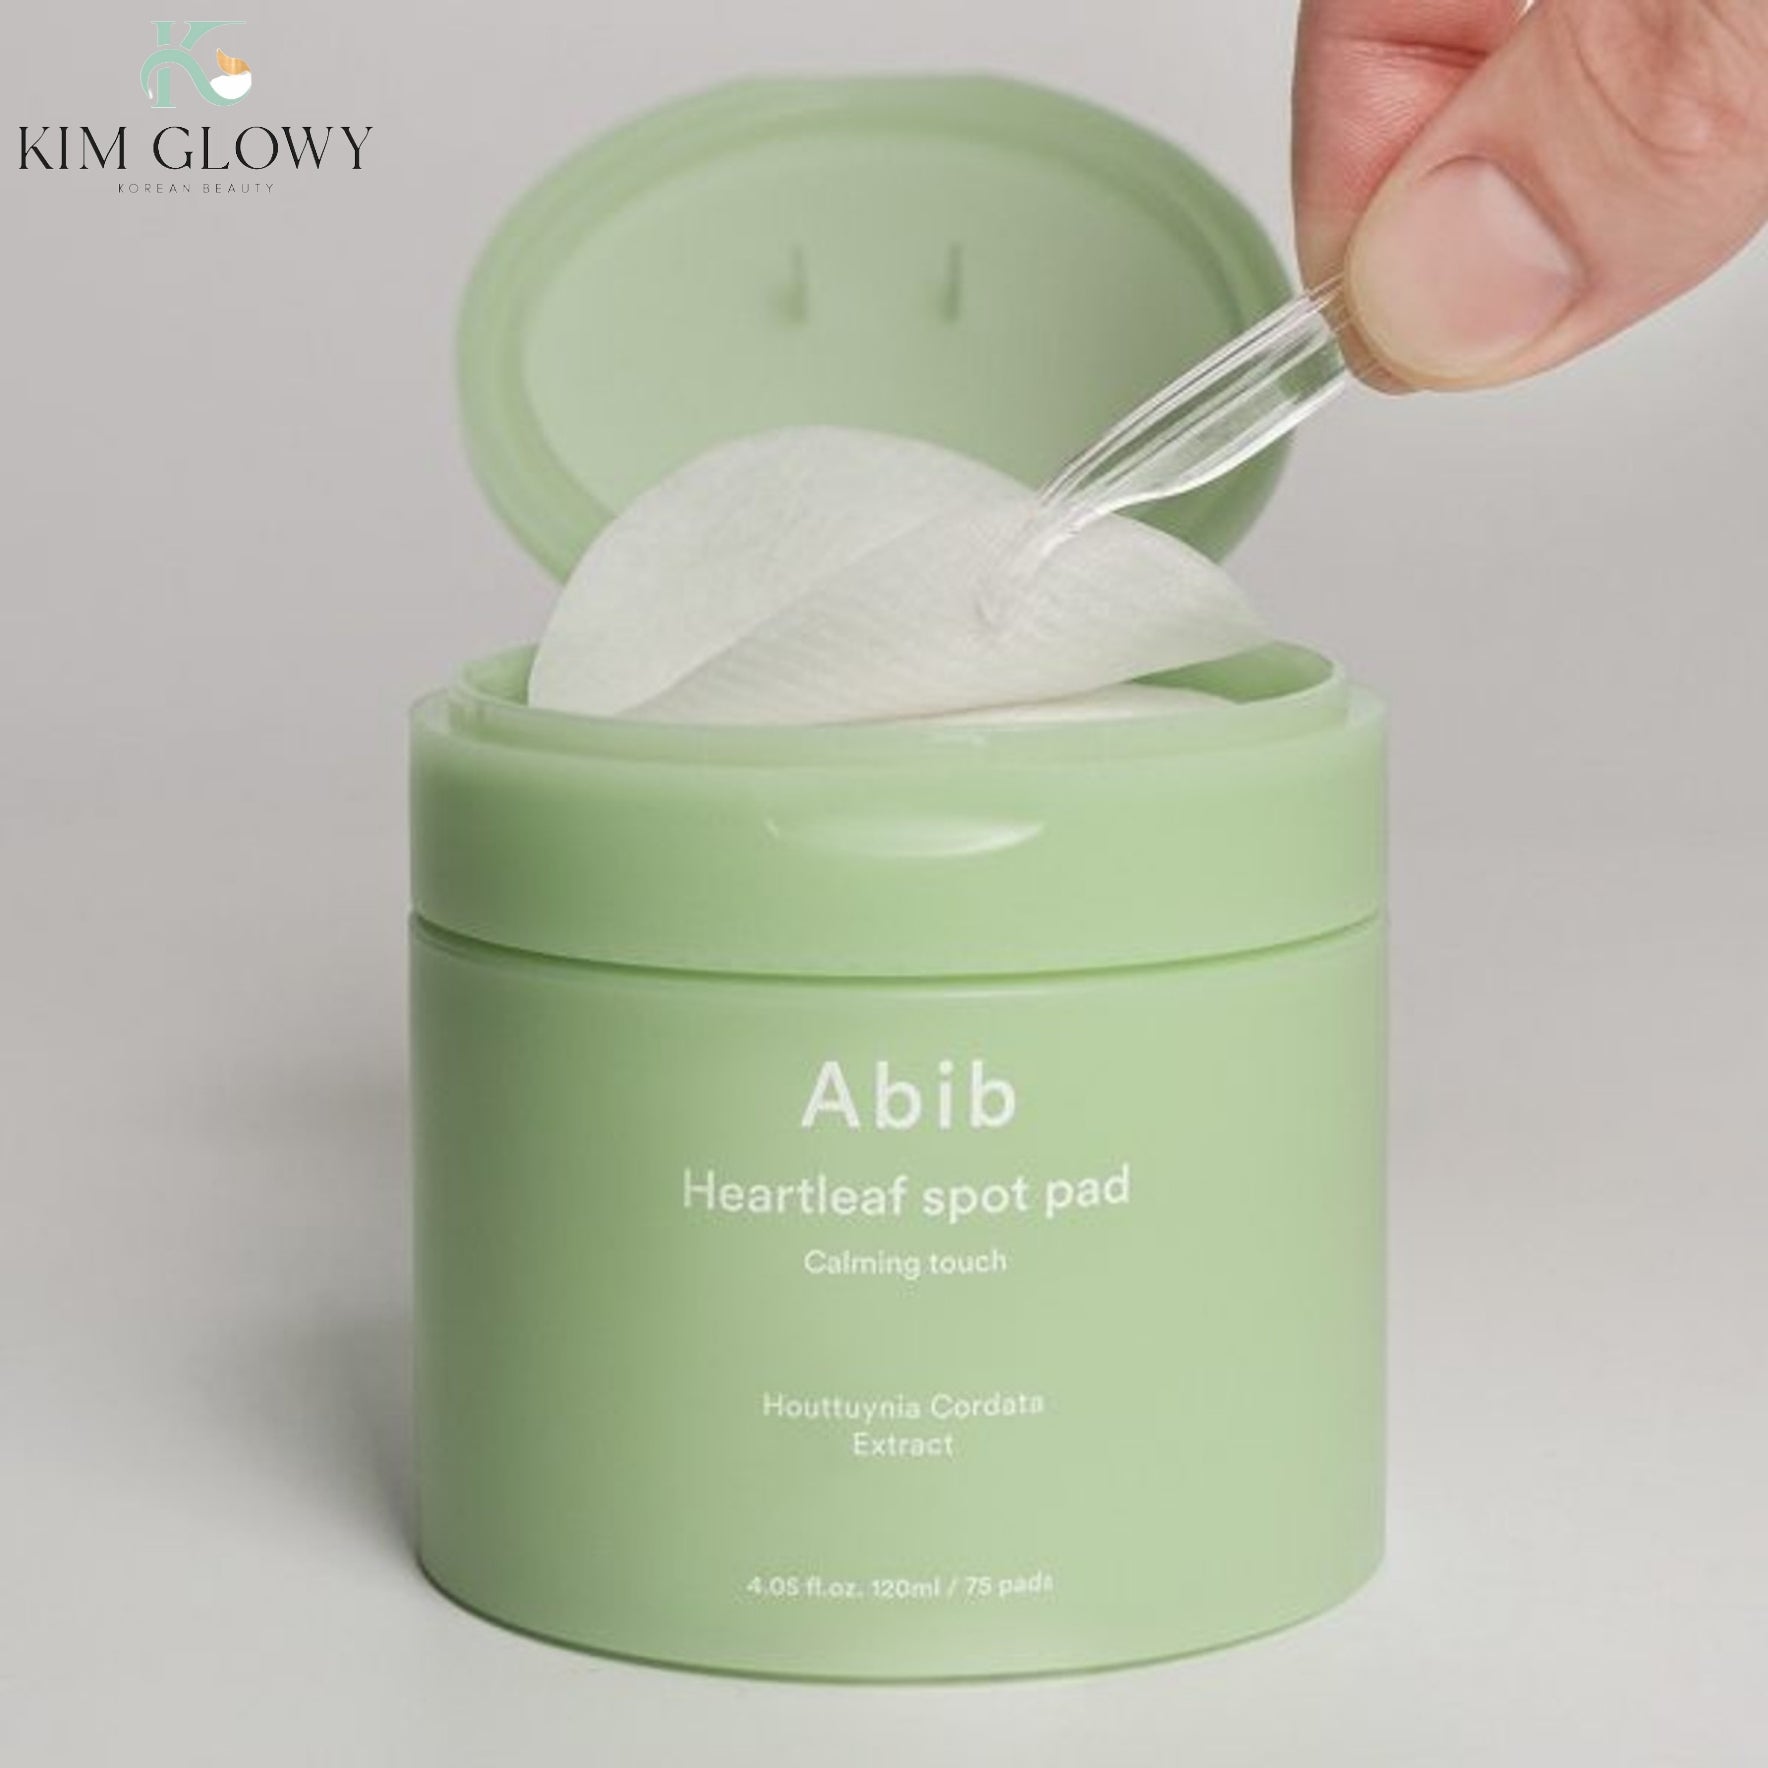 ABIB Heartleaf Spot Pad Calming Touch (80 pads)